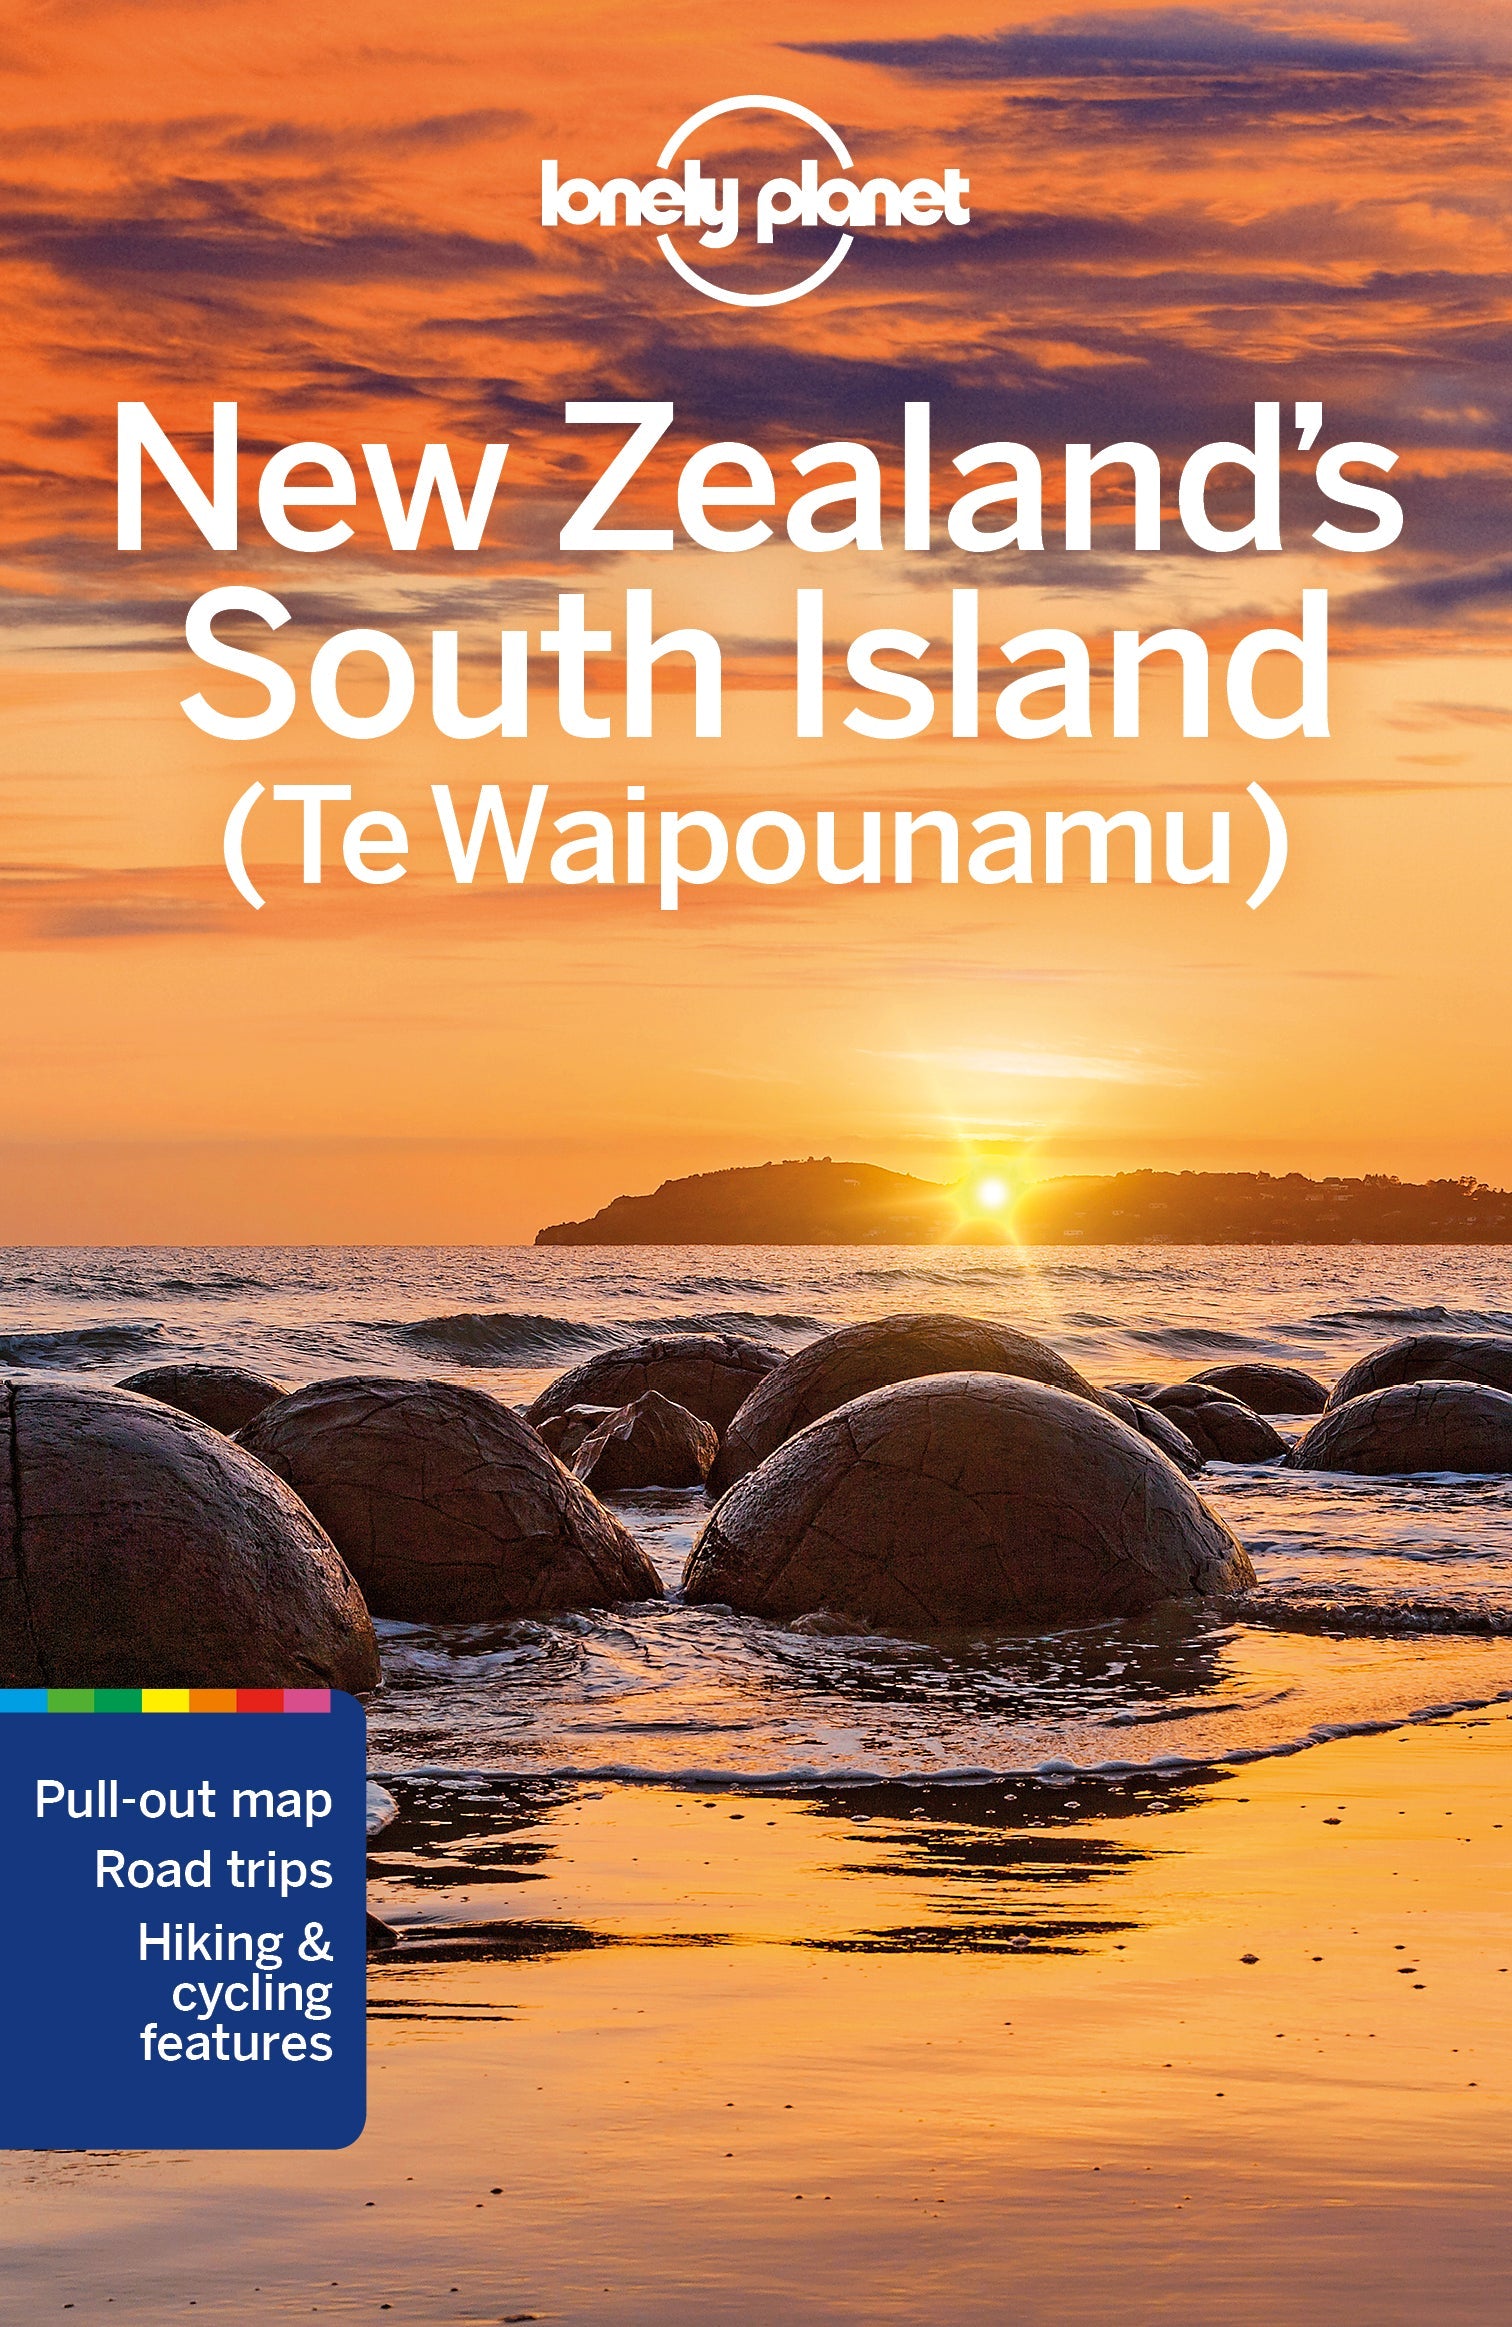 New Zealand country guide - Lonely Planet | Australia u0026 Pacific